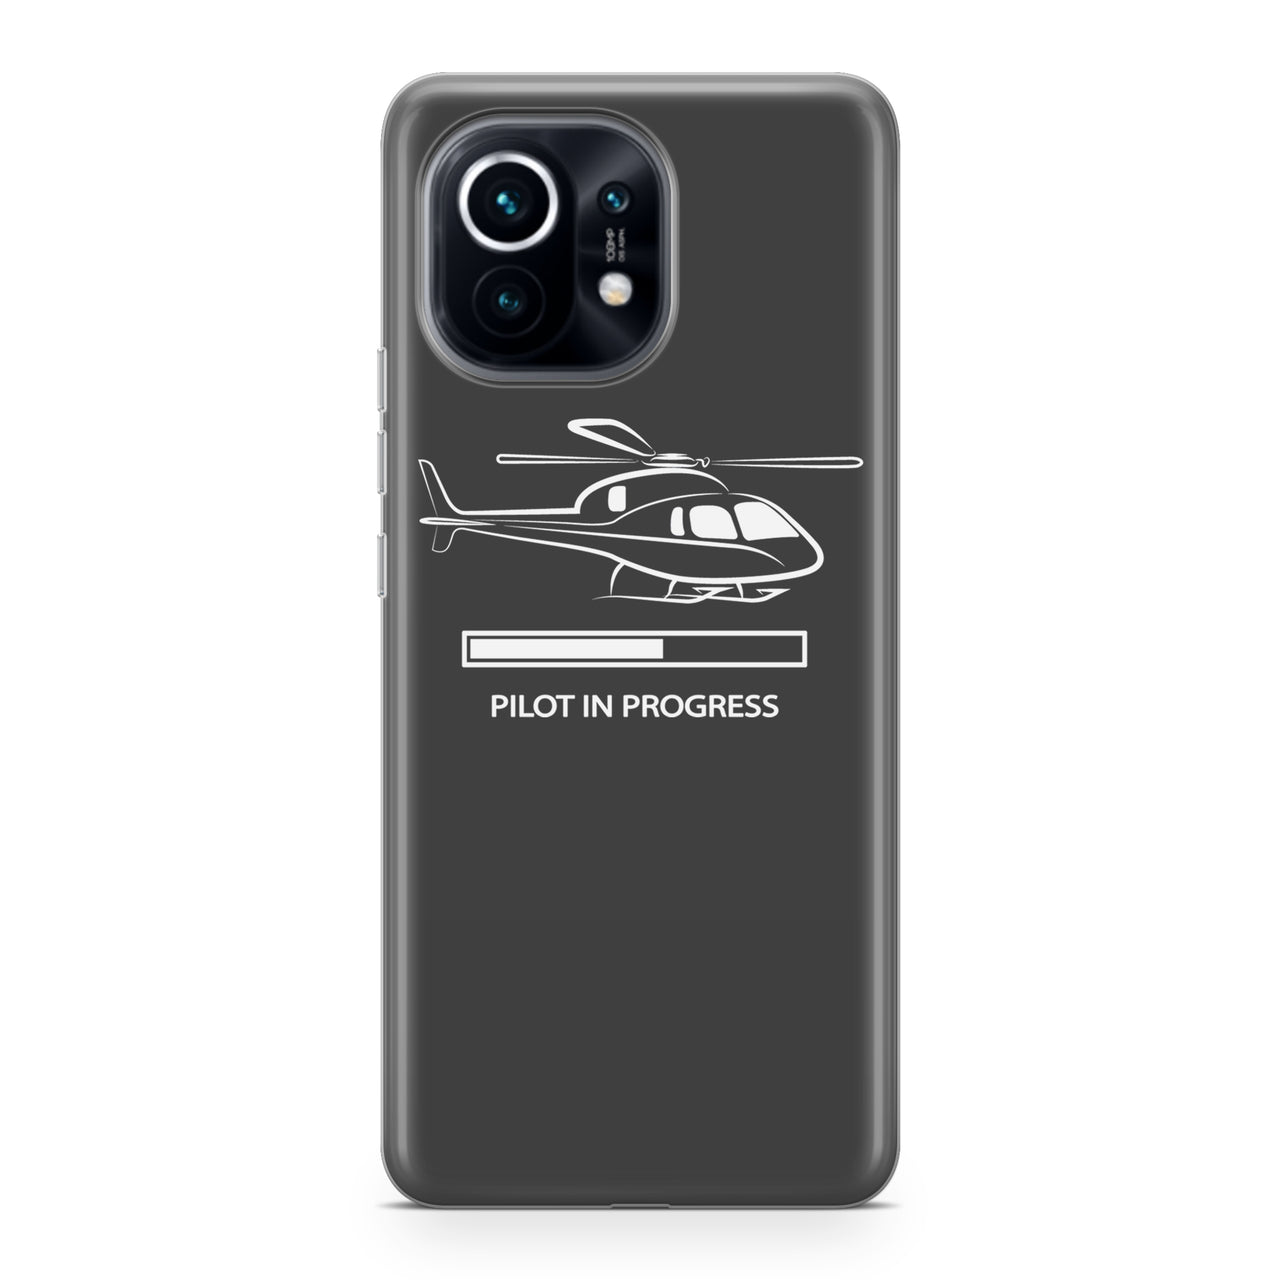 Pilot In Progress (Helicopter) Designed Xiaomi Cases